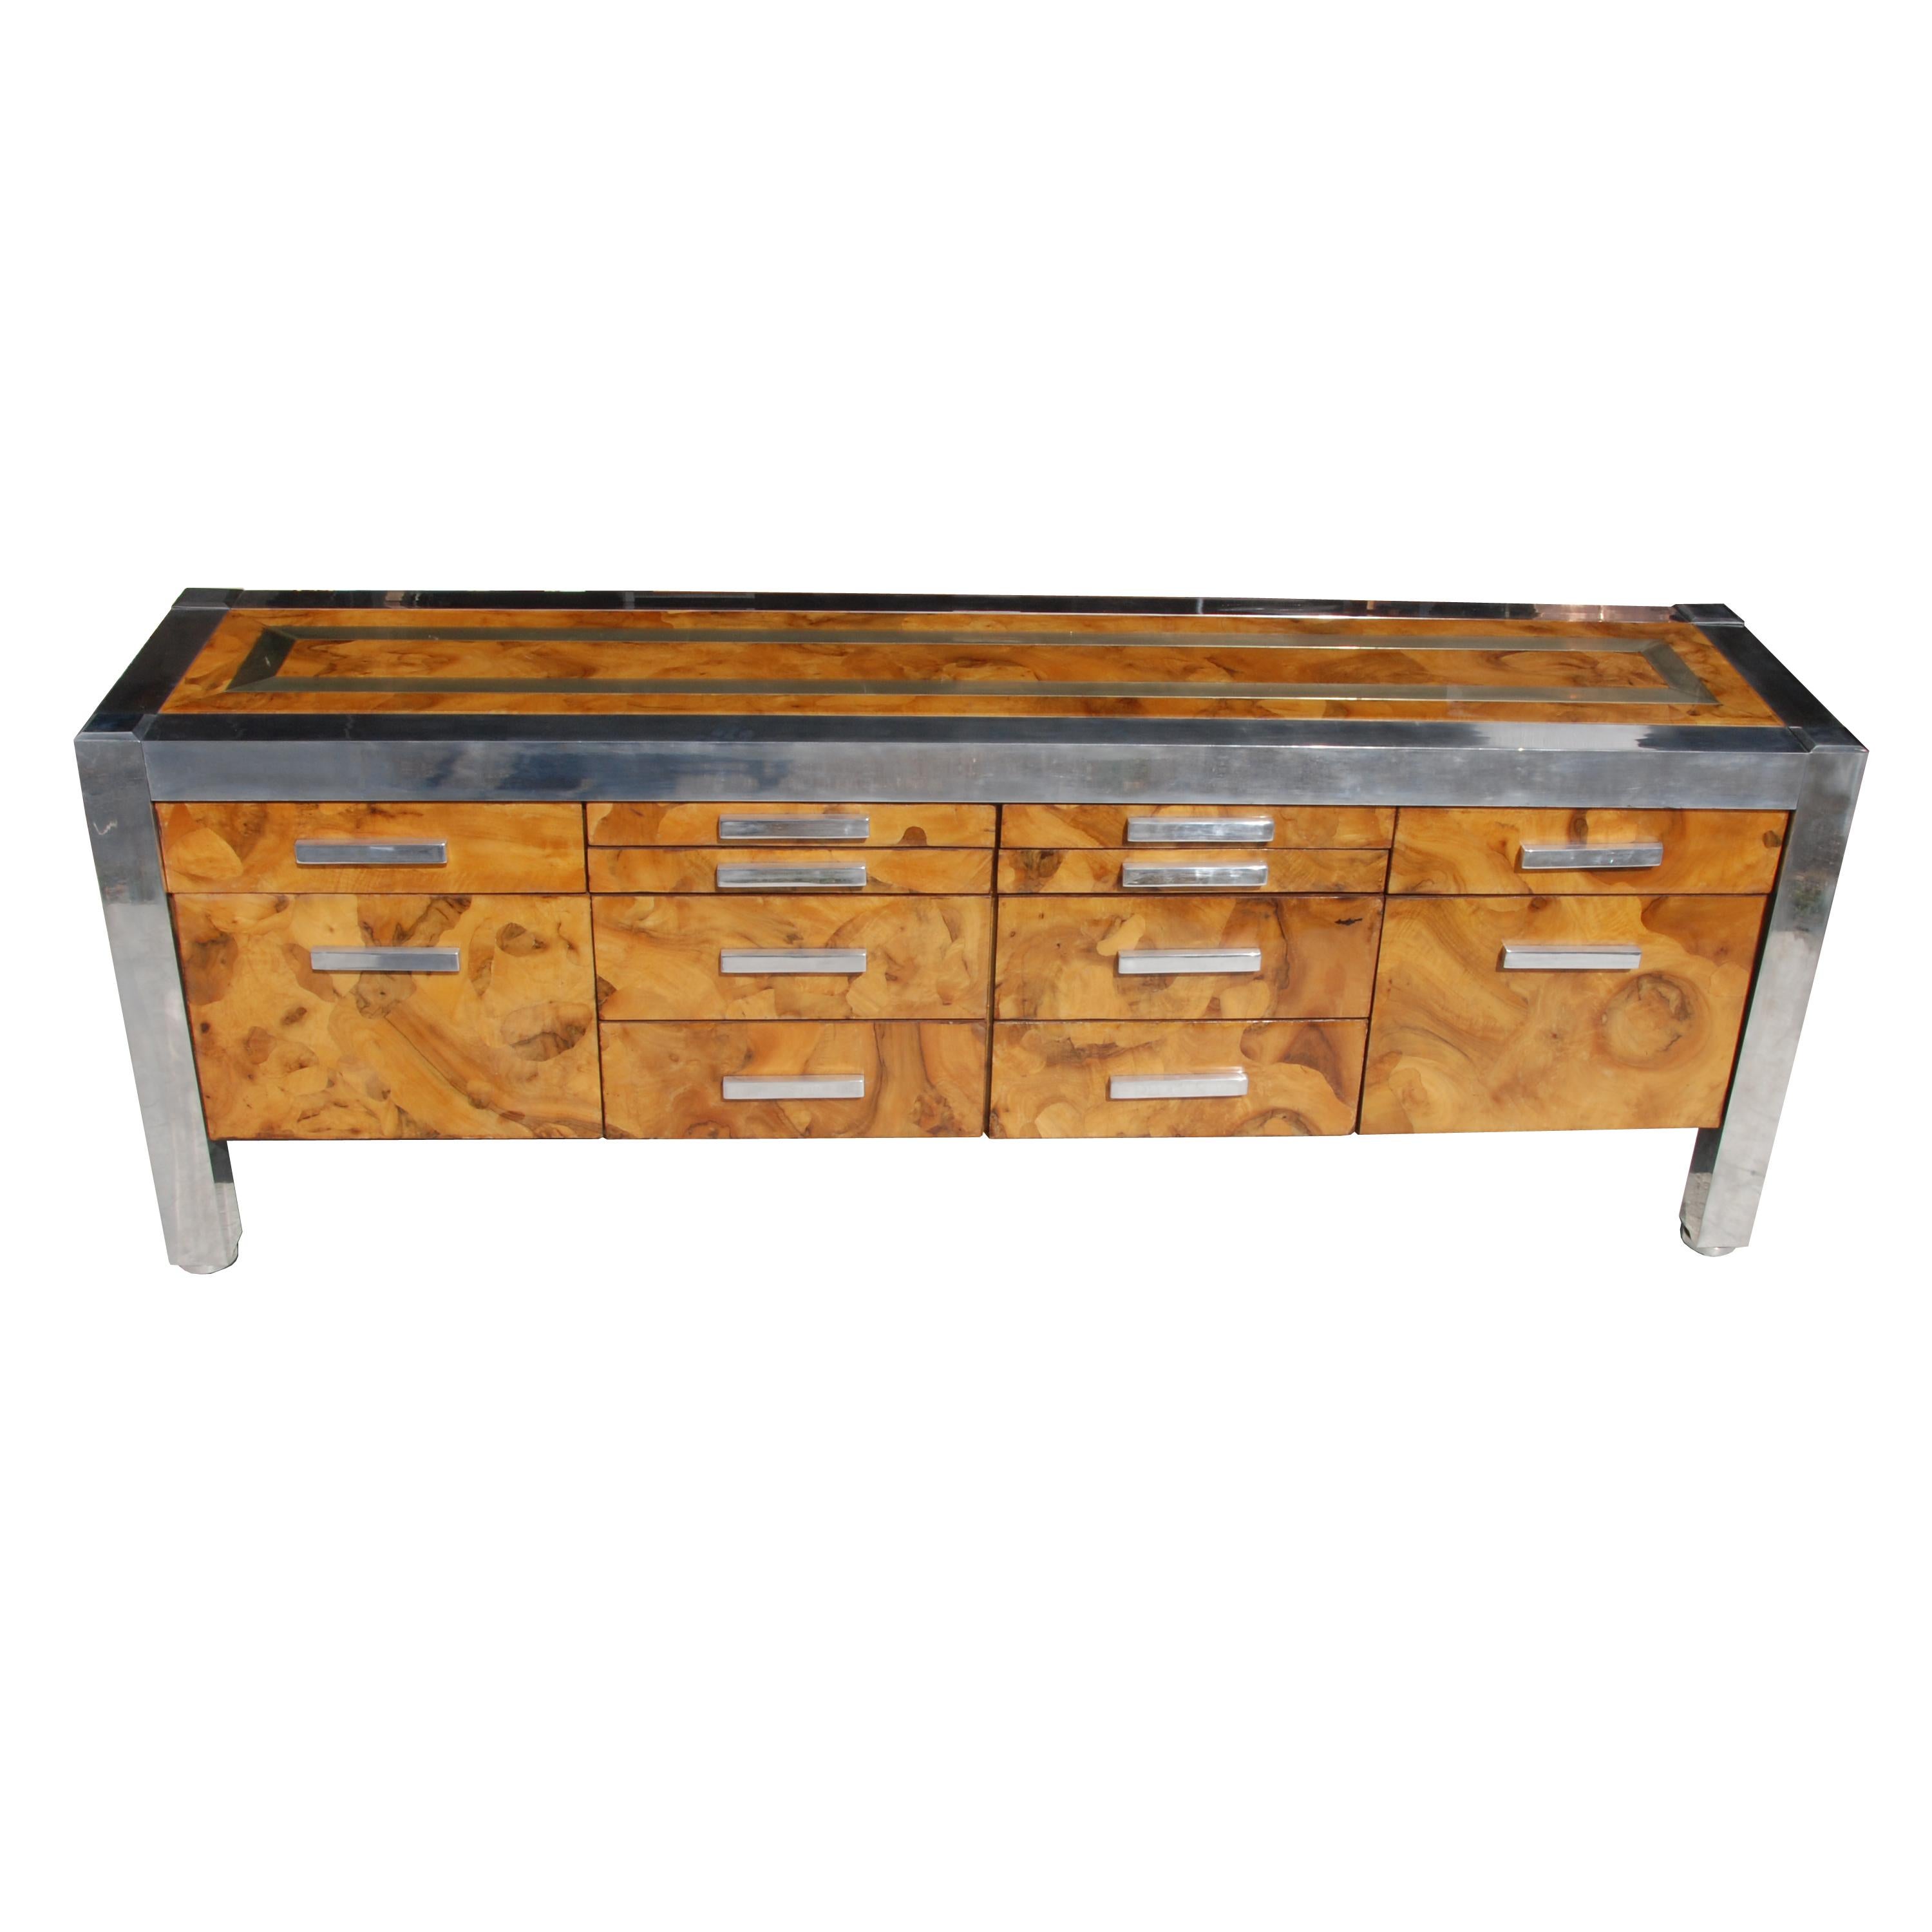 Pace Collection burled wood and chrome credenza

Features chrome detailing, and a light burled wood. 
Has ample storage space, 12 drawers.

  